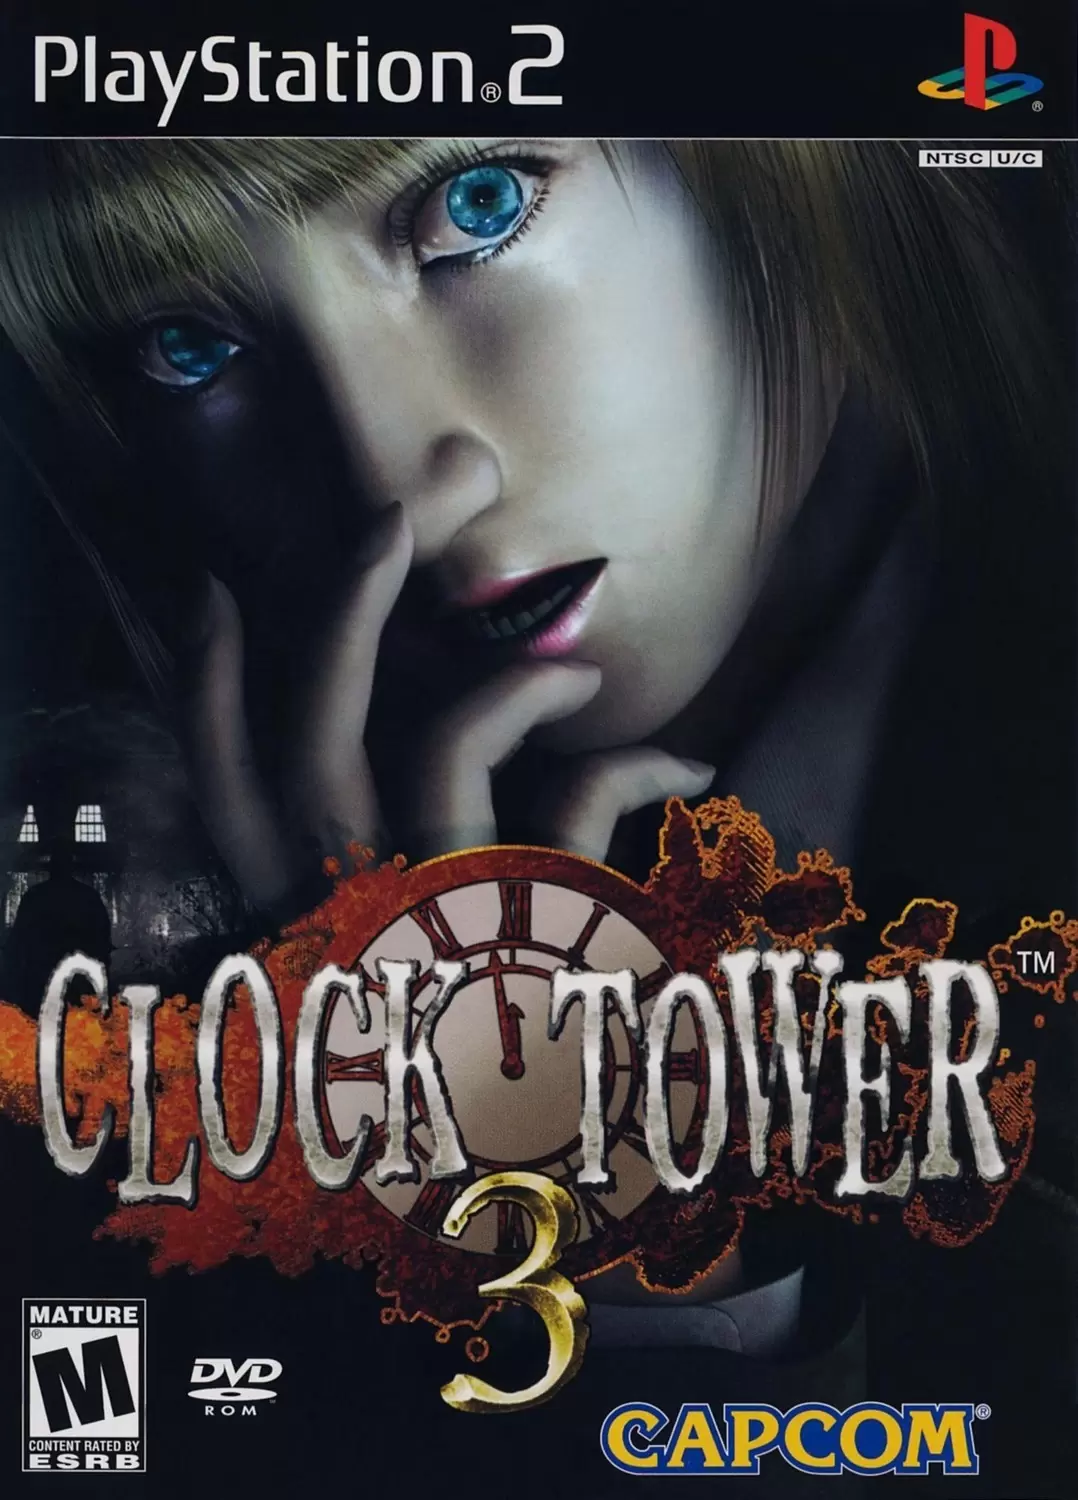 PS2 Games - Clock Tower 3